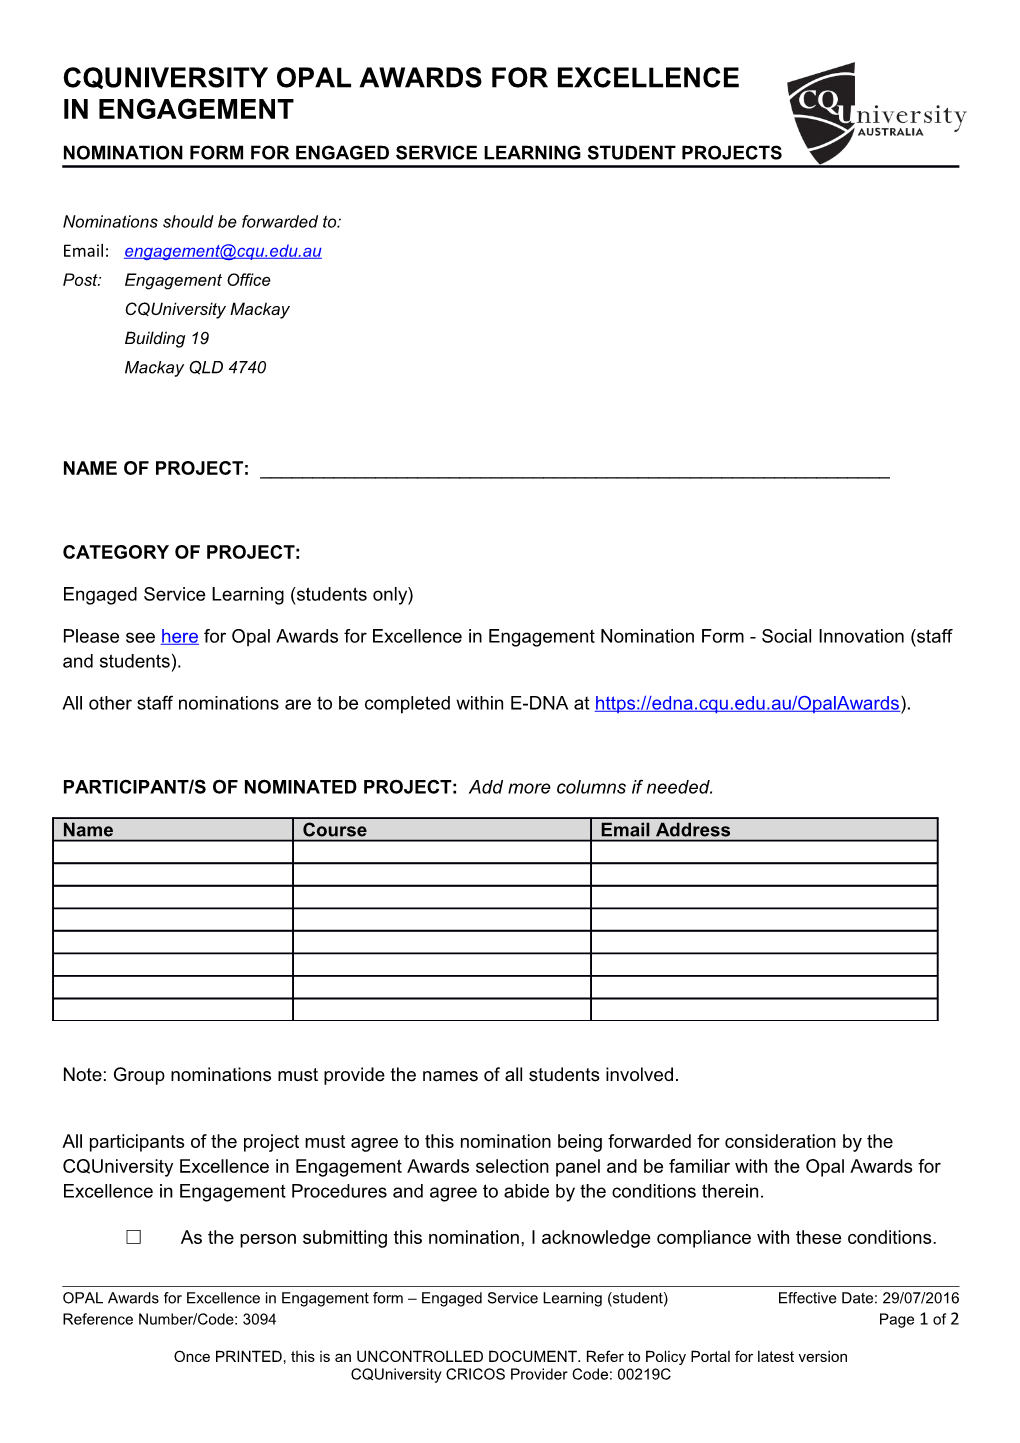 Nomination Form for Engaged Service Learning Student Projects